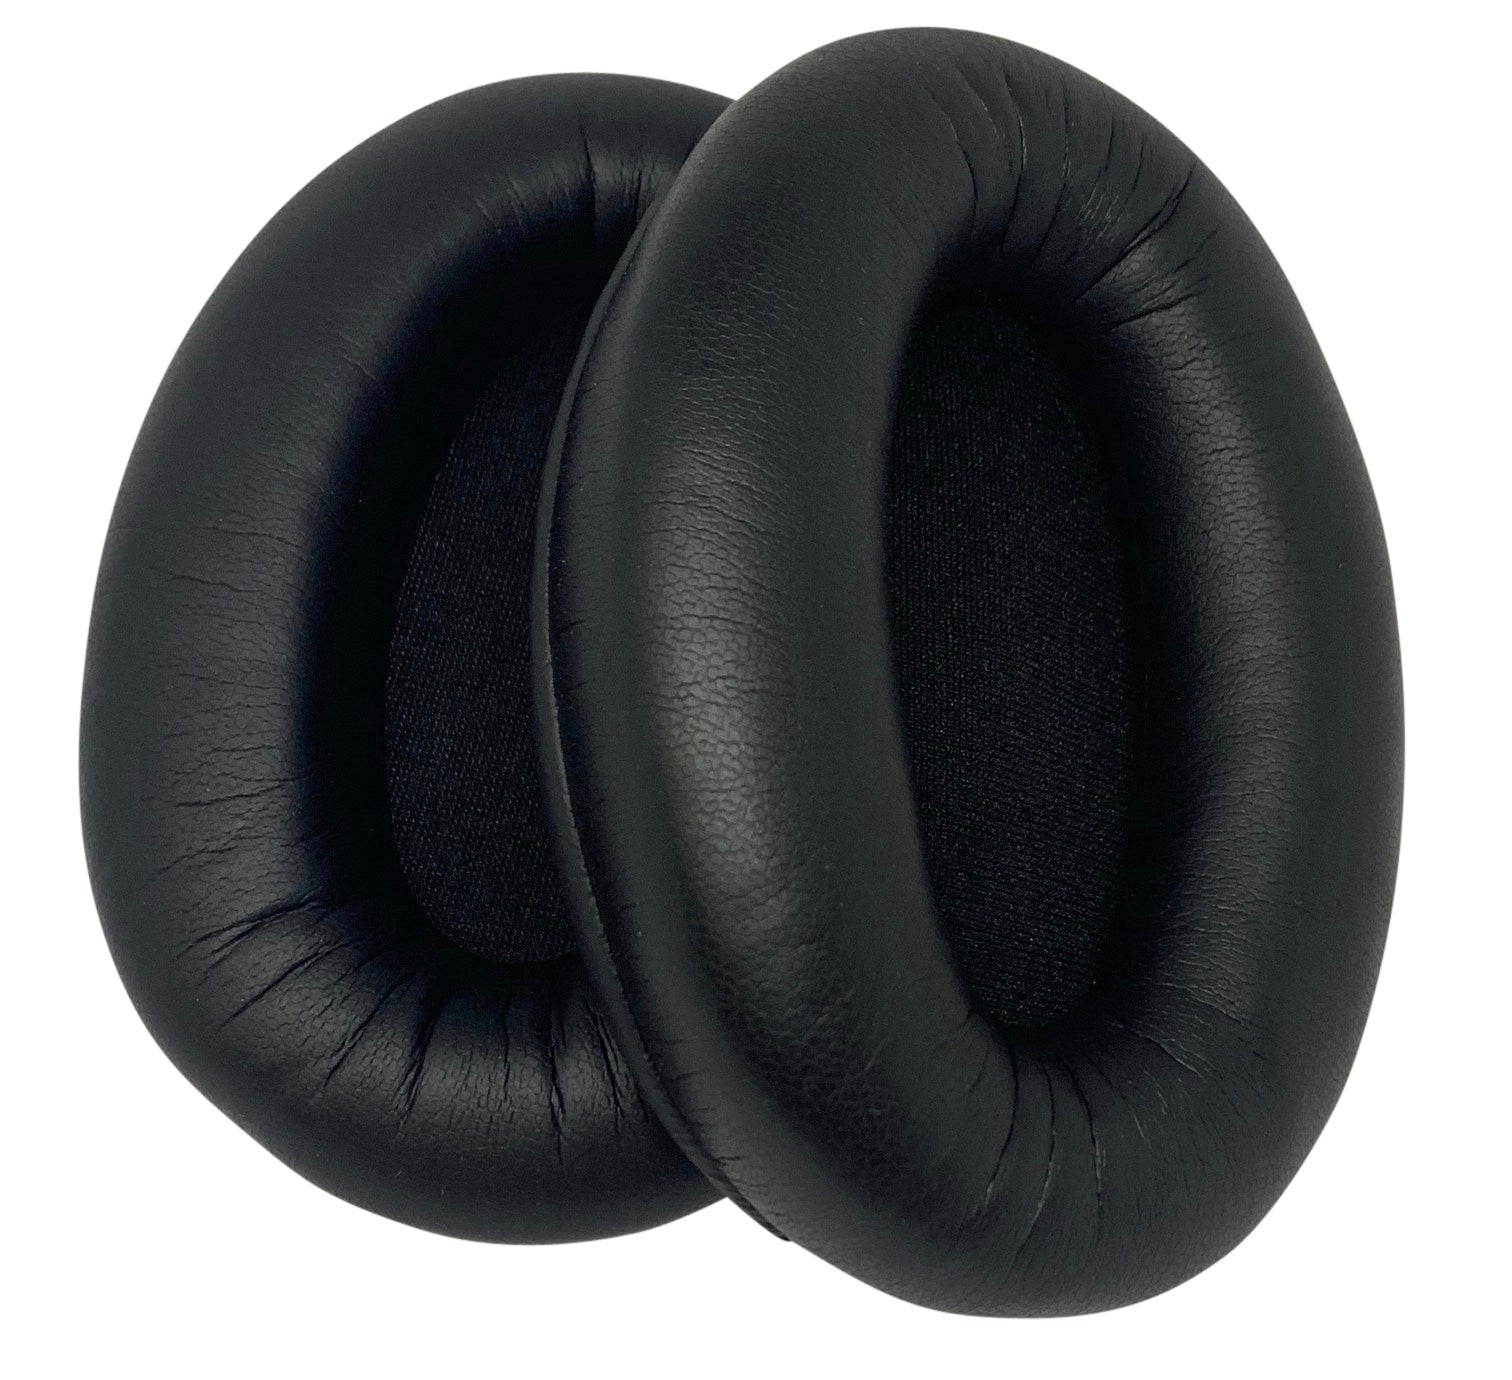 Pair Replacement Ear Pad Cushions Parts for Sony WH-1000XM3 Wireless Headphones - CentralSound